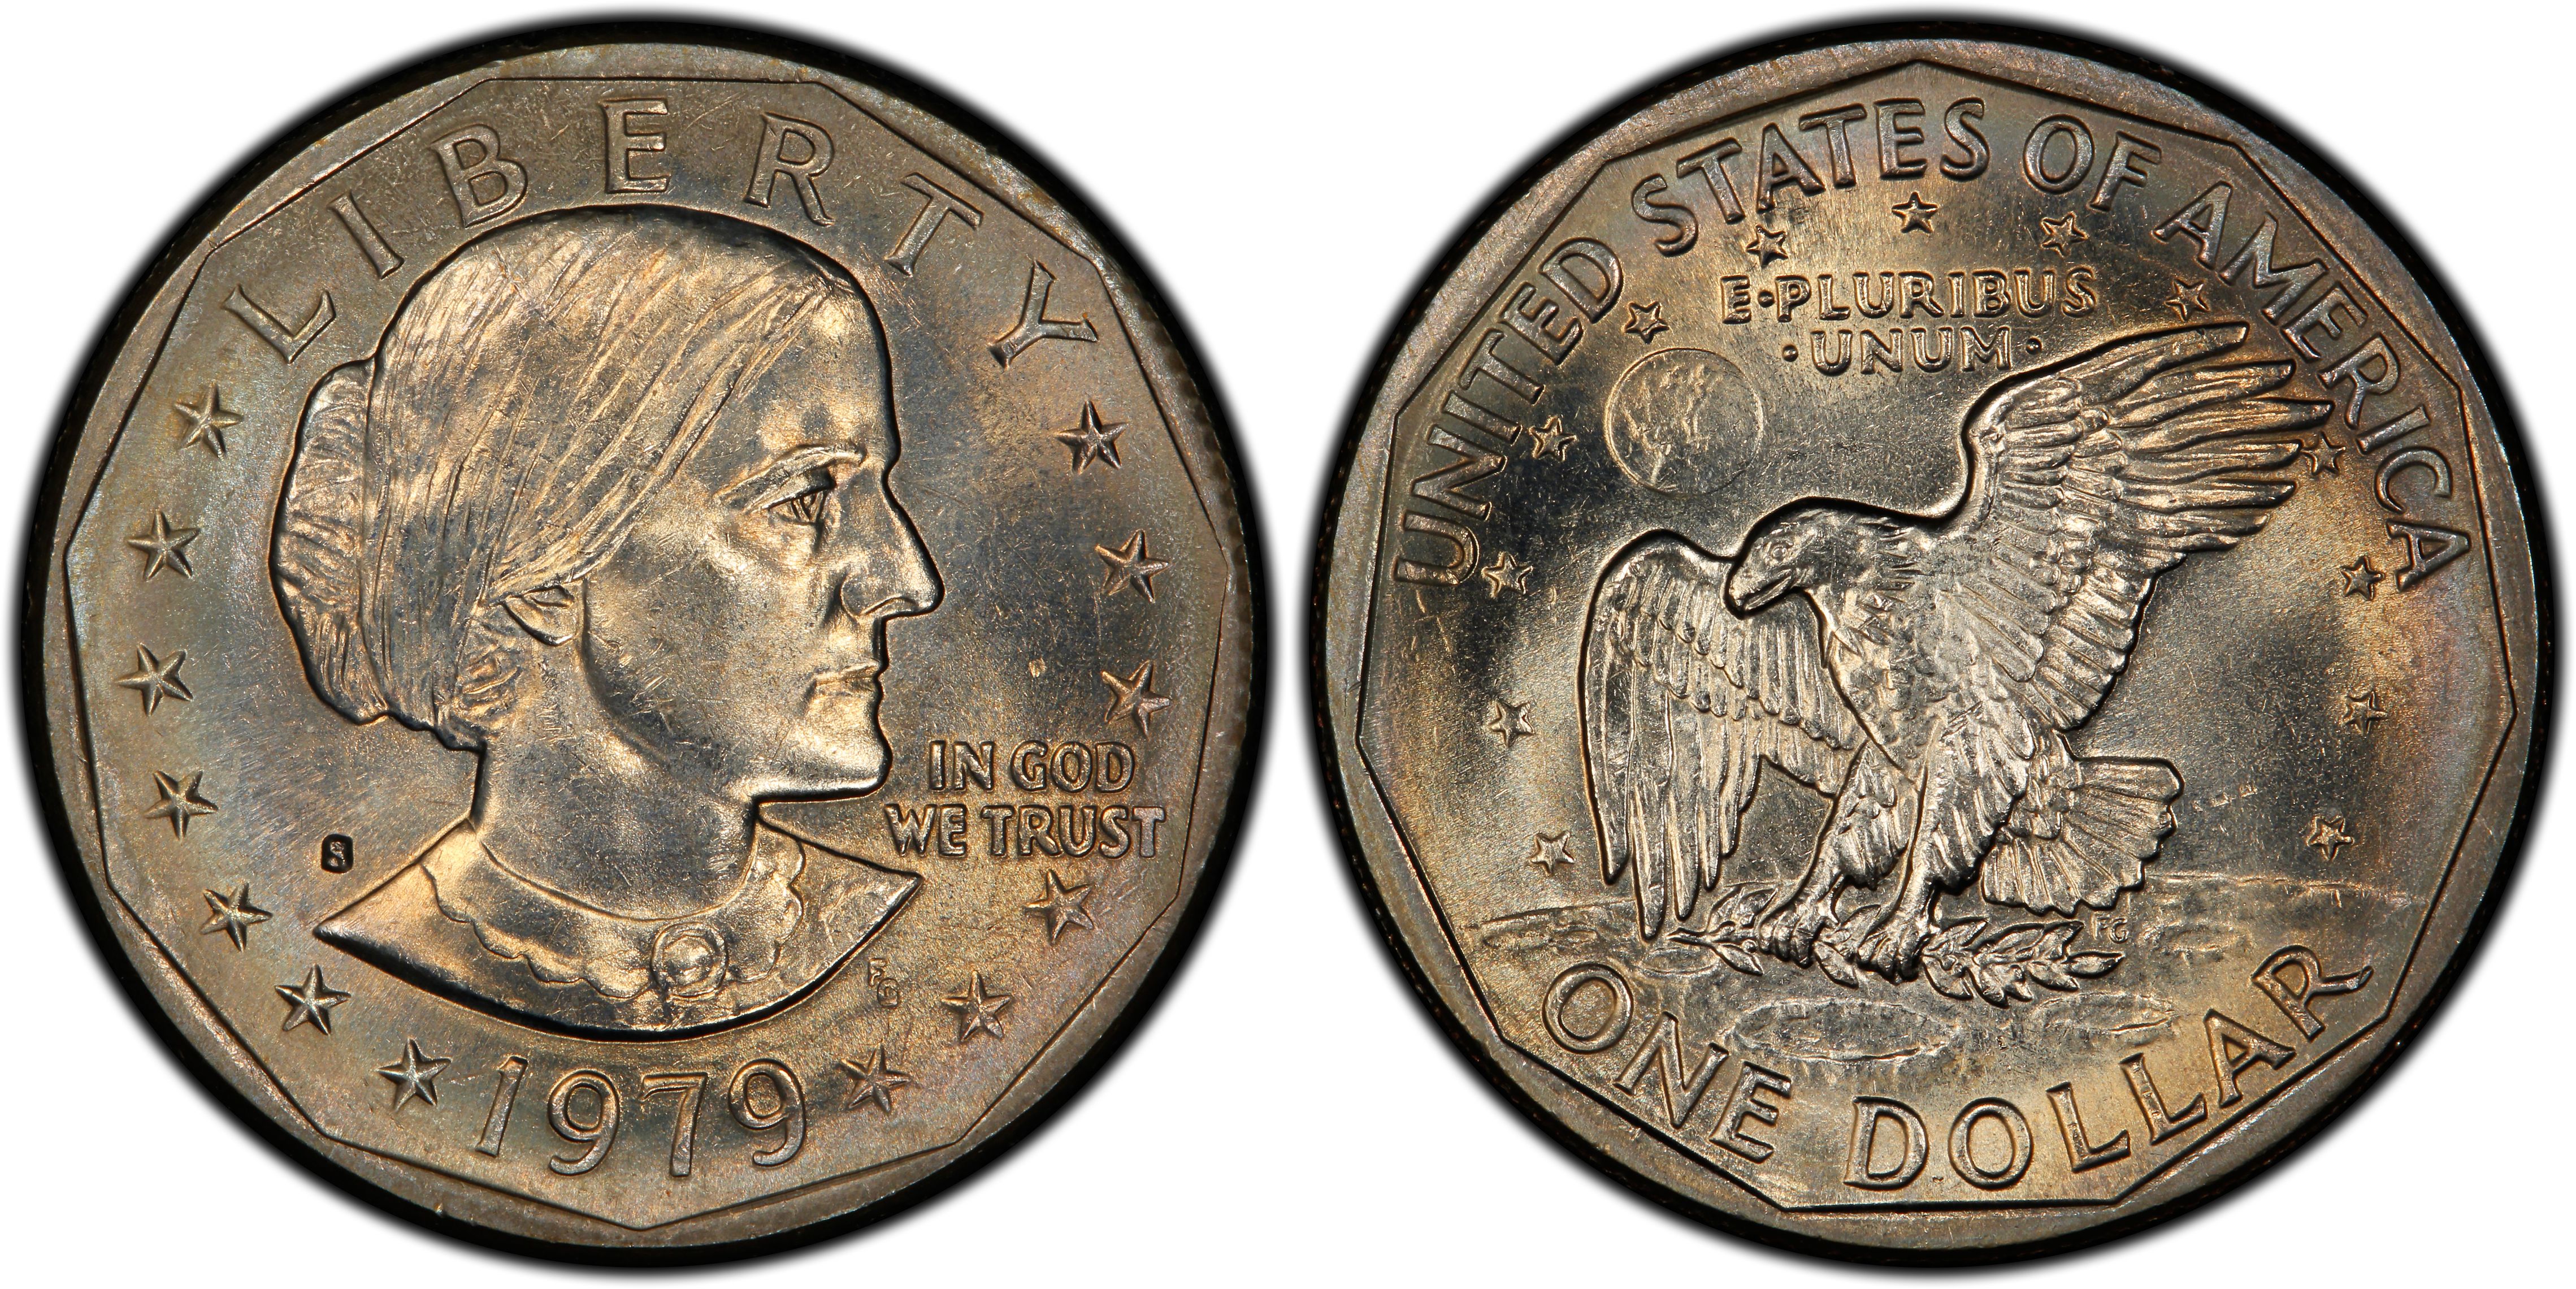 Images of Susan B. Anthony Dollar 1979-S SBA$1 - PCGS CoinFacts